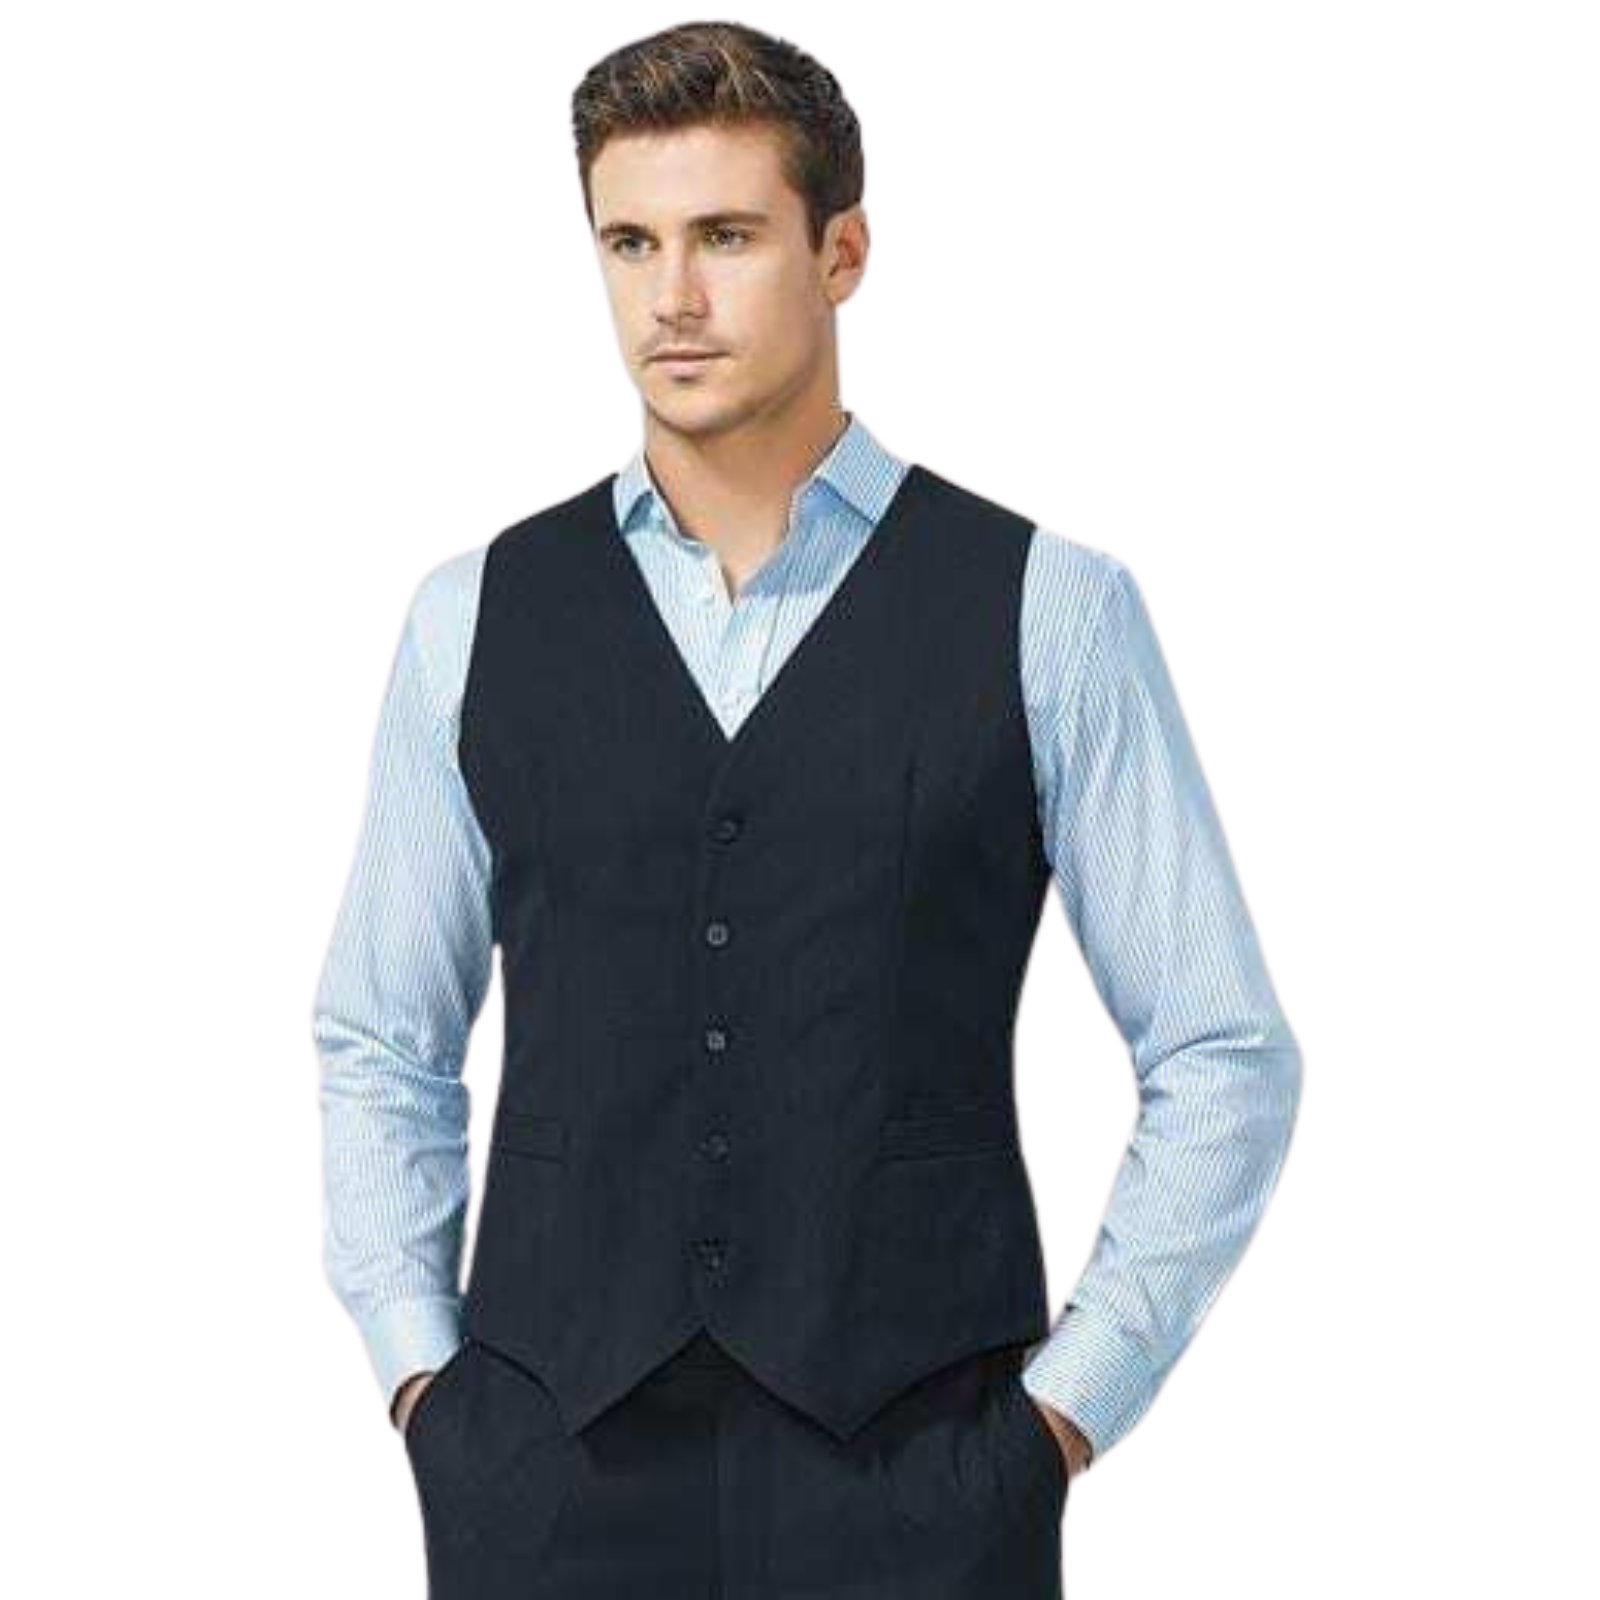 Mens Peaked Vest Waistcoat w/ Knitted Back Suit Formal Wedding Dress Up - Navy - 117